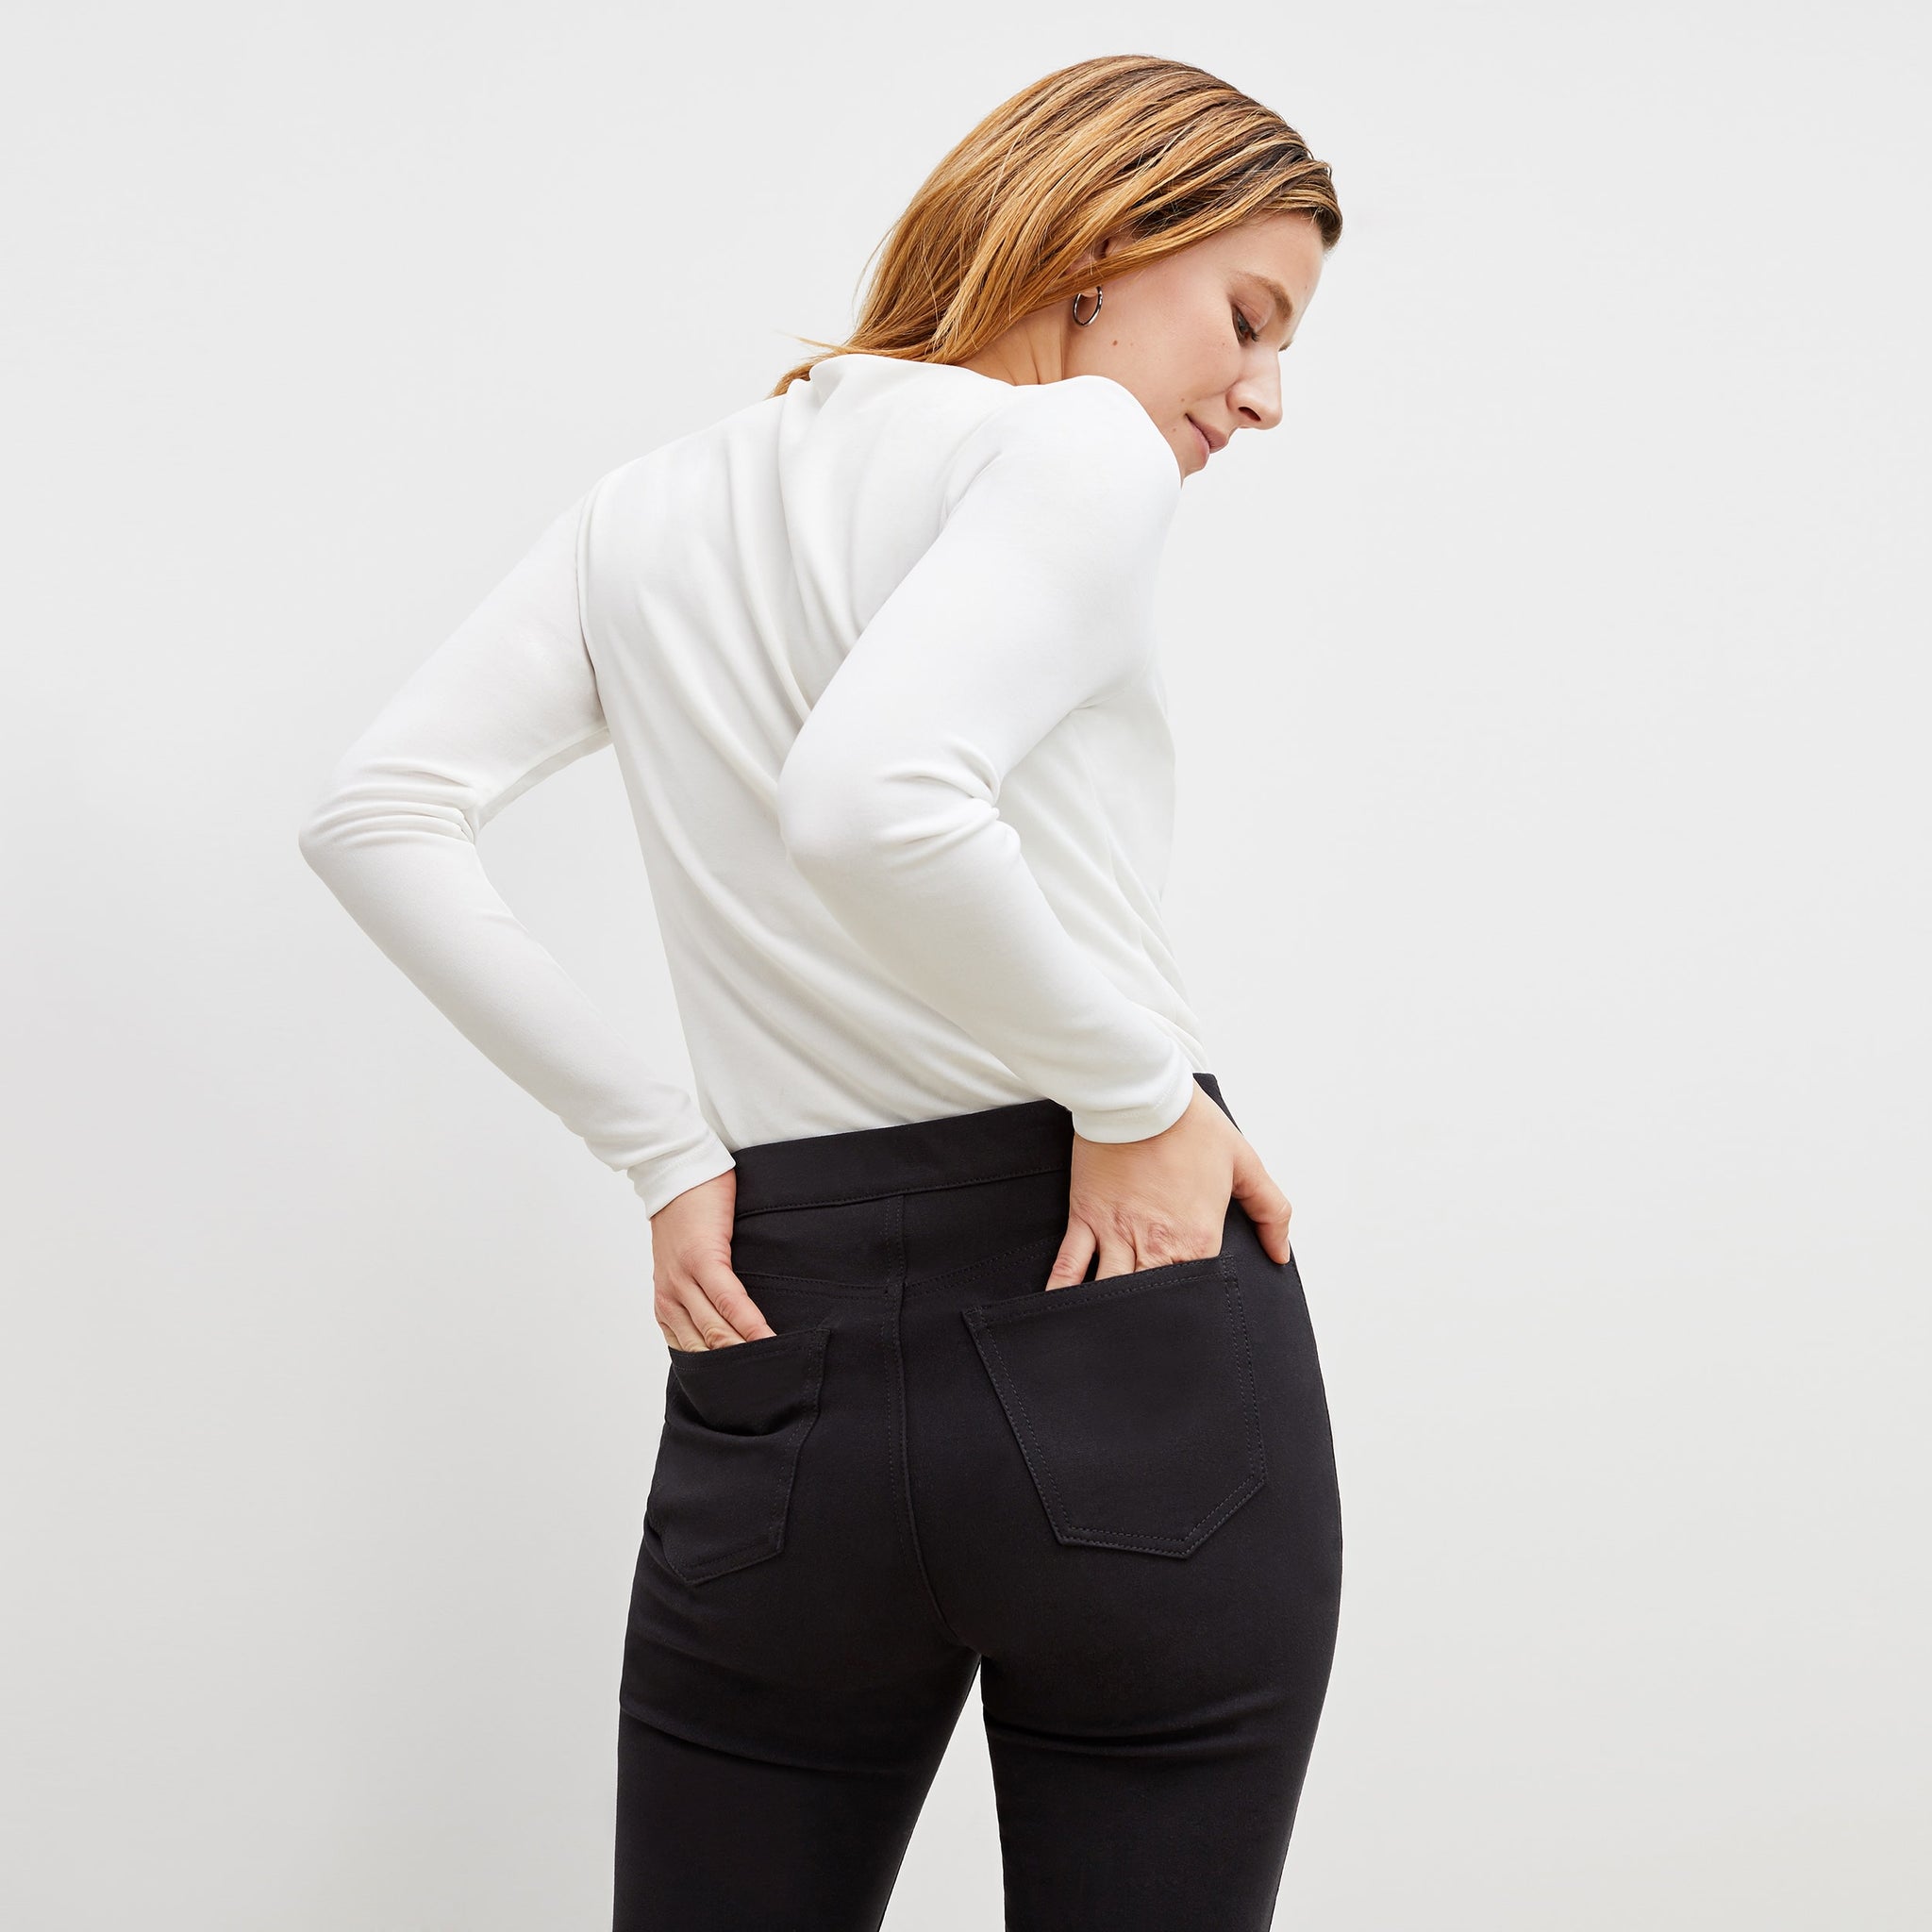 Detail back image of a woman standing wearing the Hockley pant easy cotton in Black